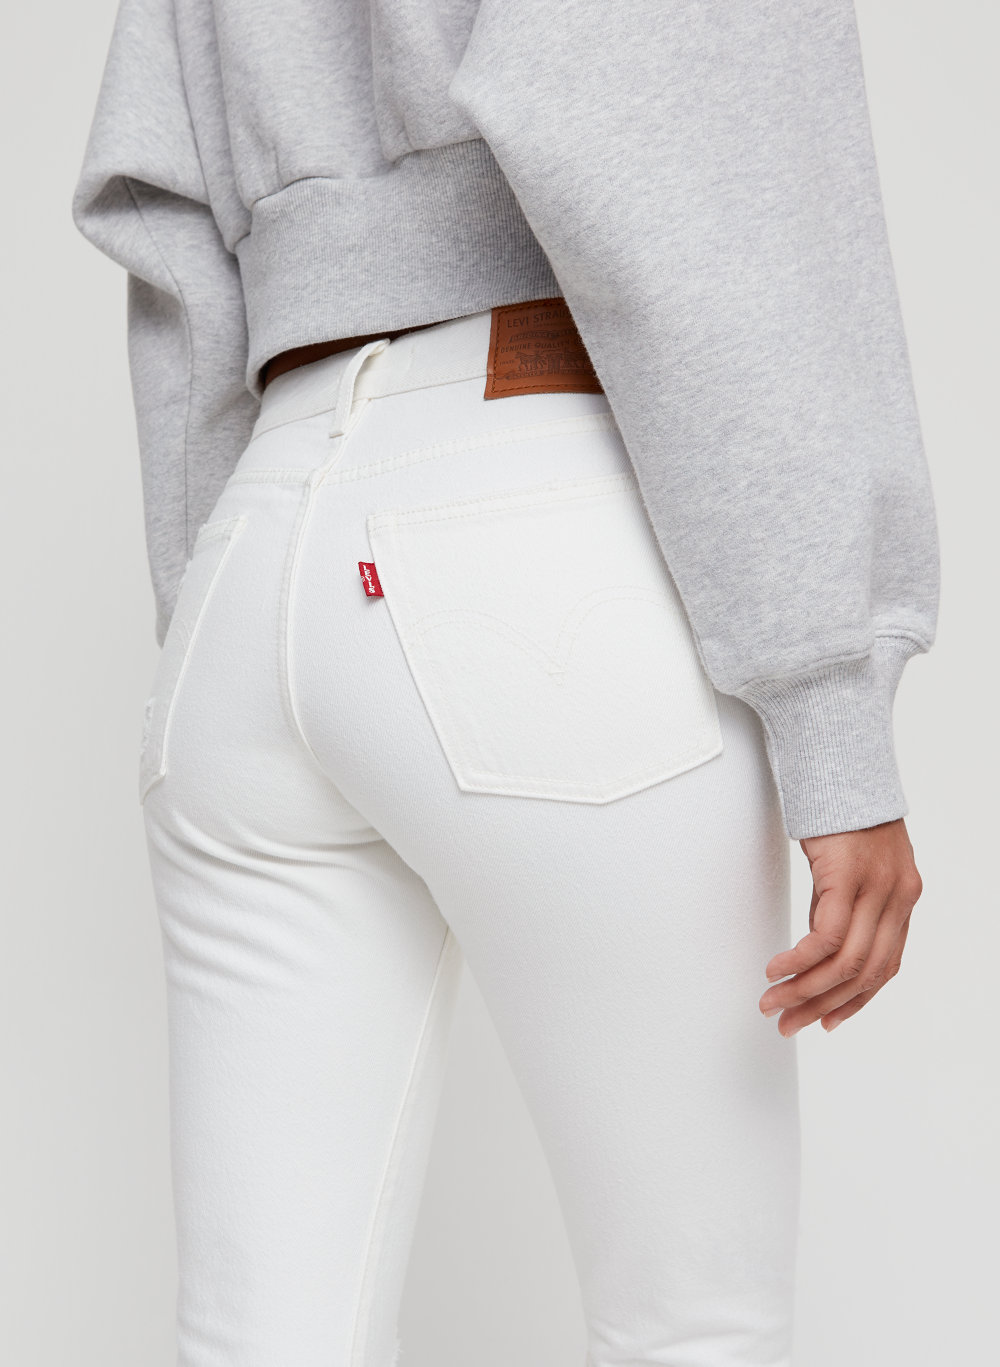 levis white wedgie jeans